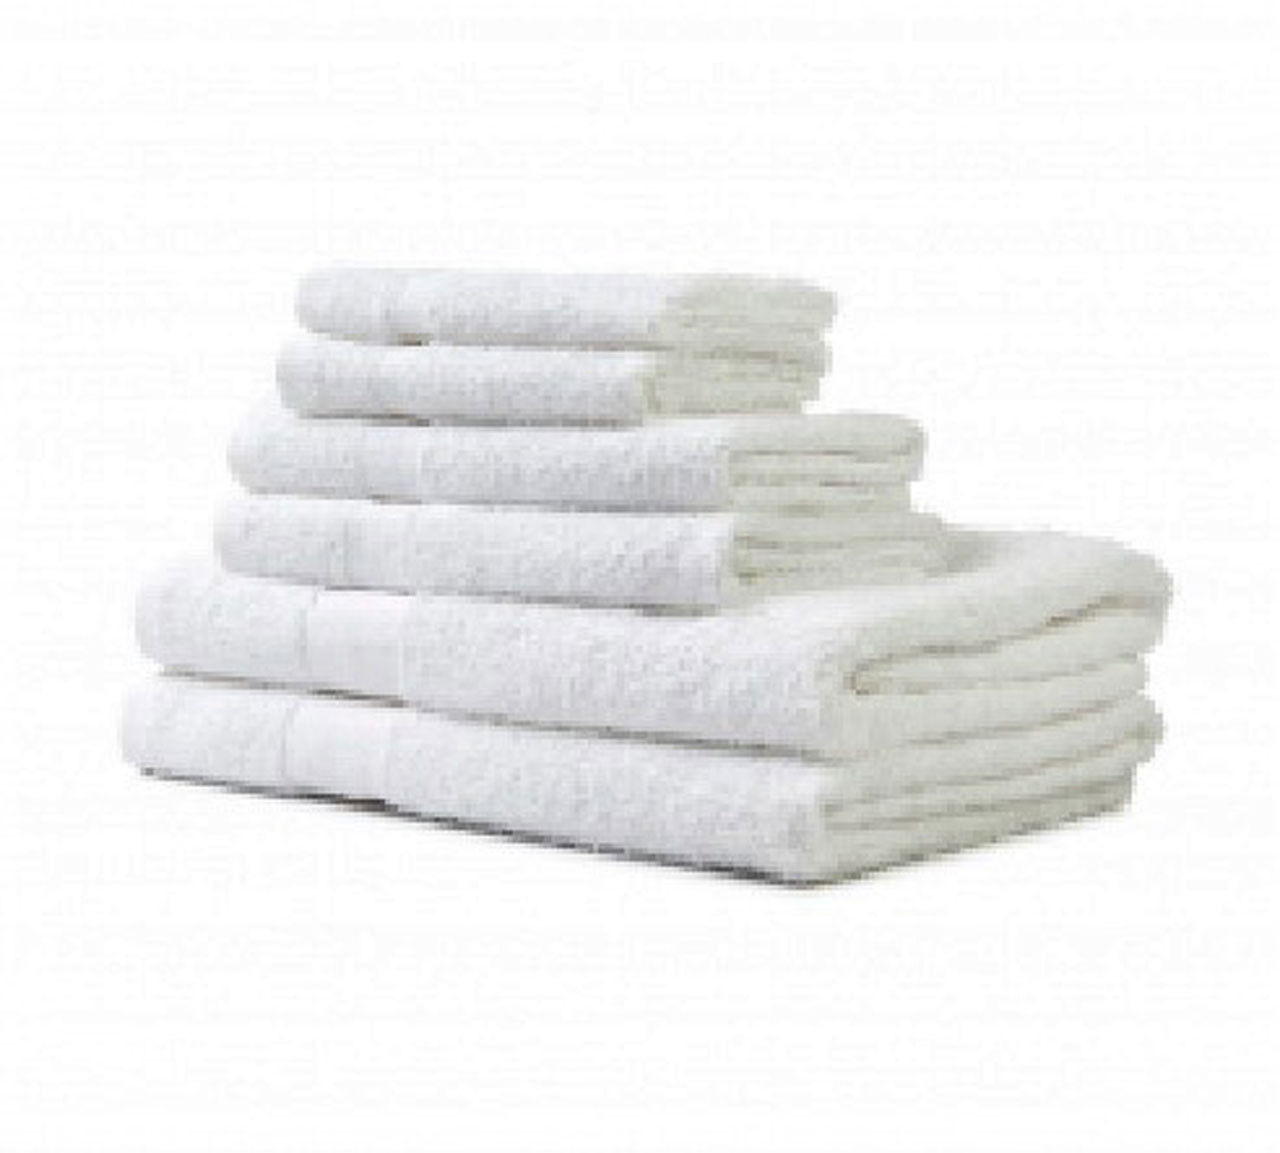 Does your jewel wholesale range include various types of towels?